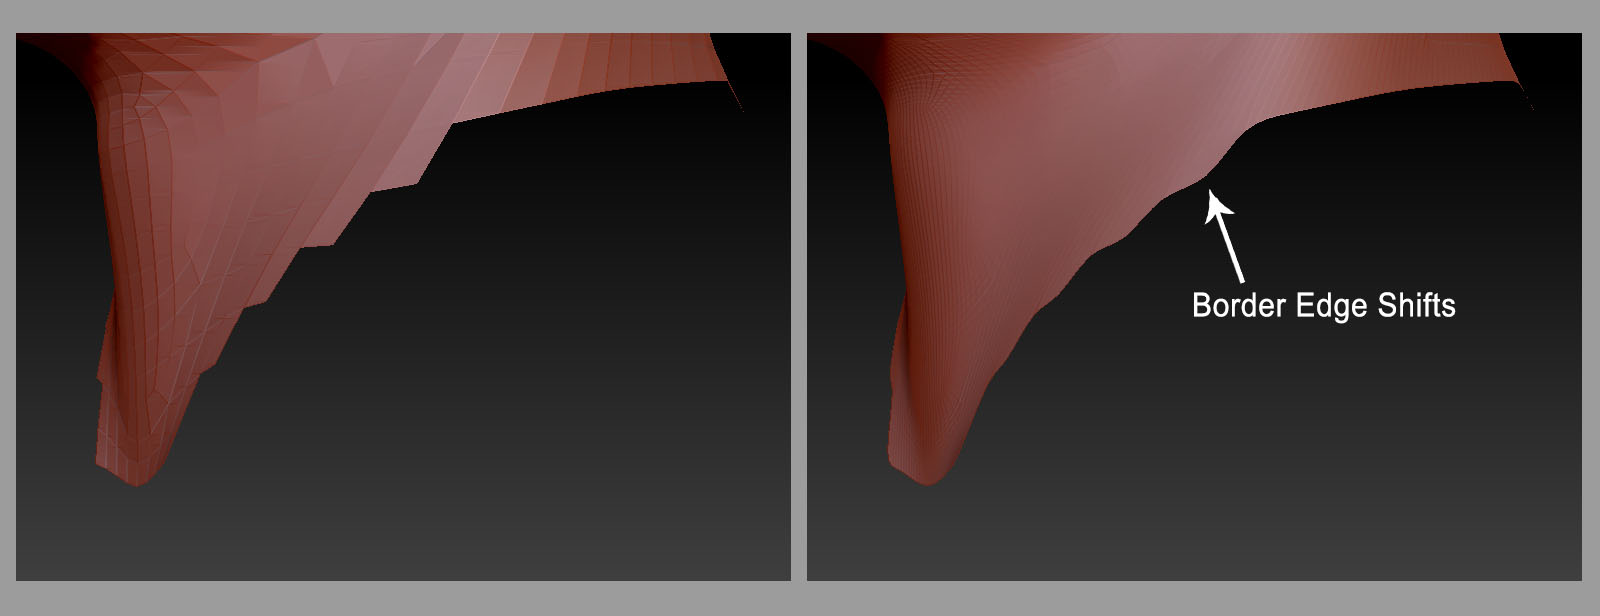 how to divide in zbrush without caving edges in